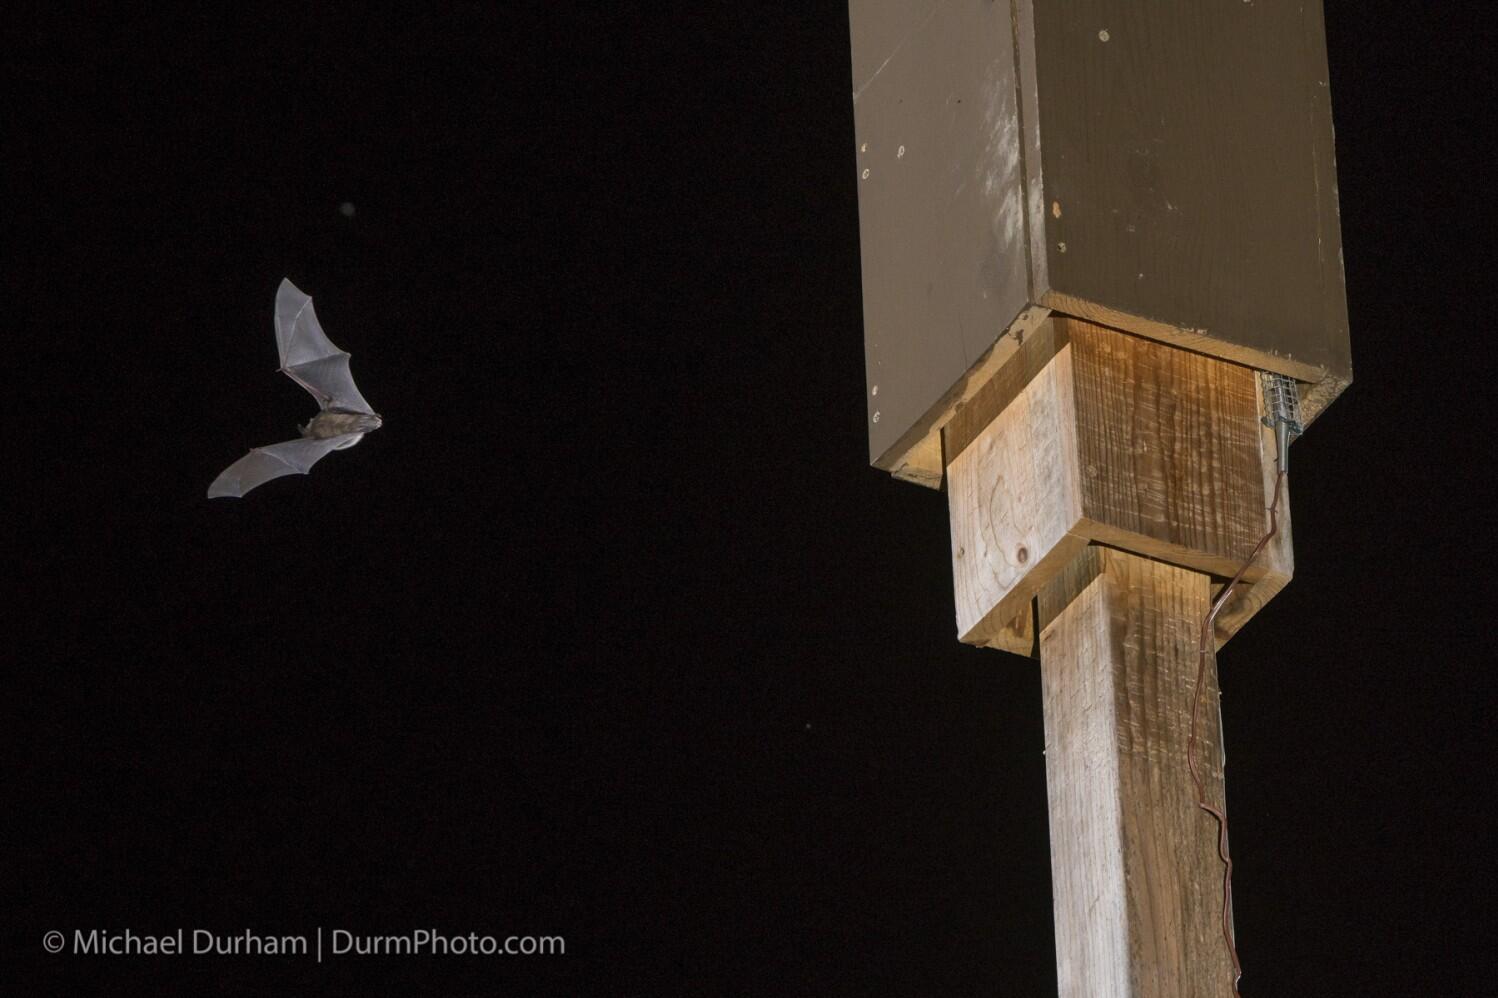 Love bats? Think twice about that bat box, experts say